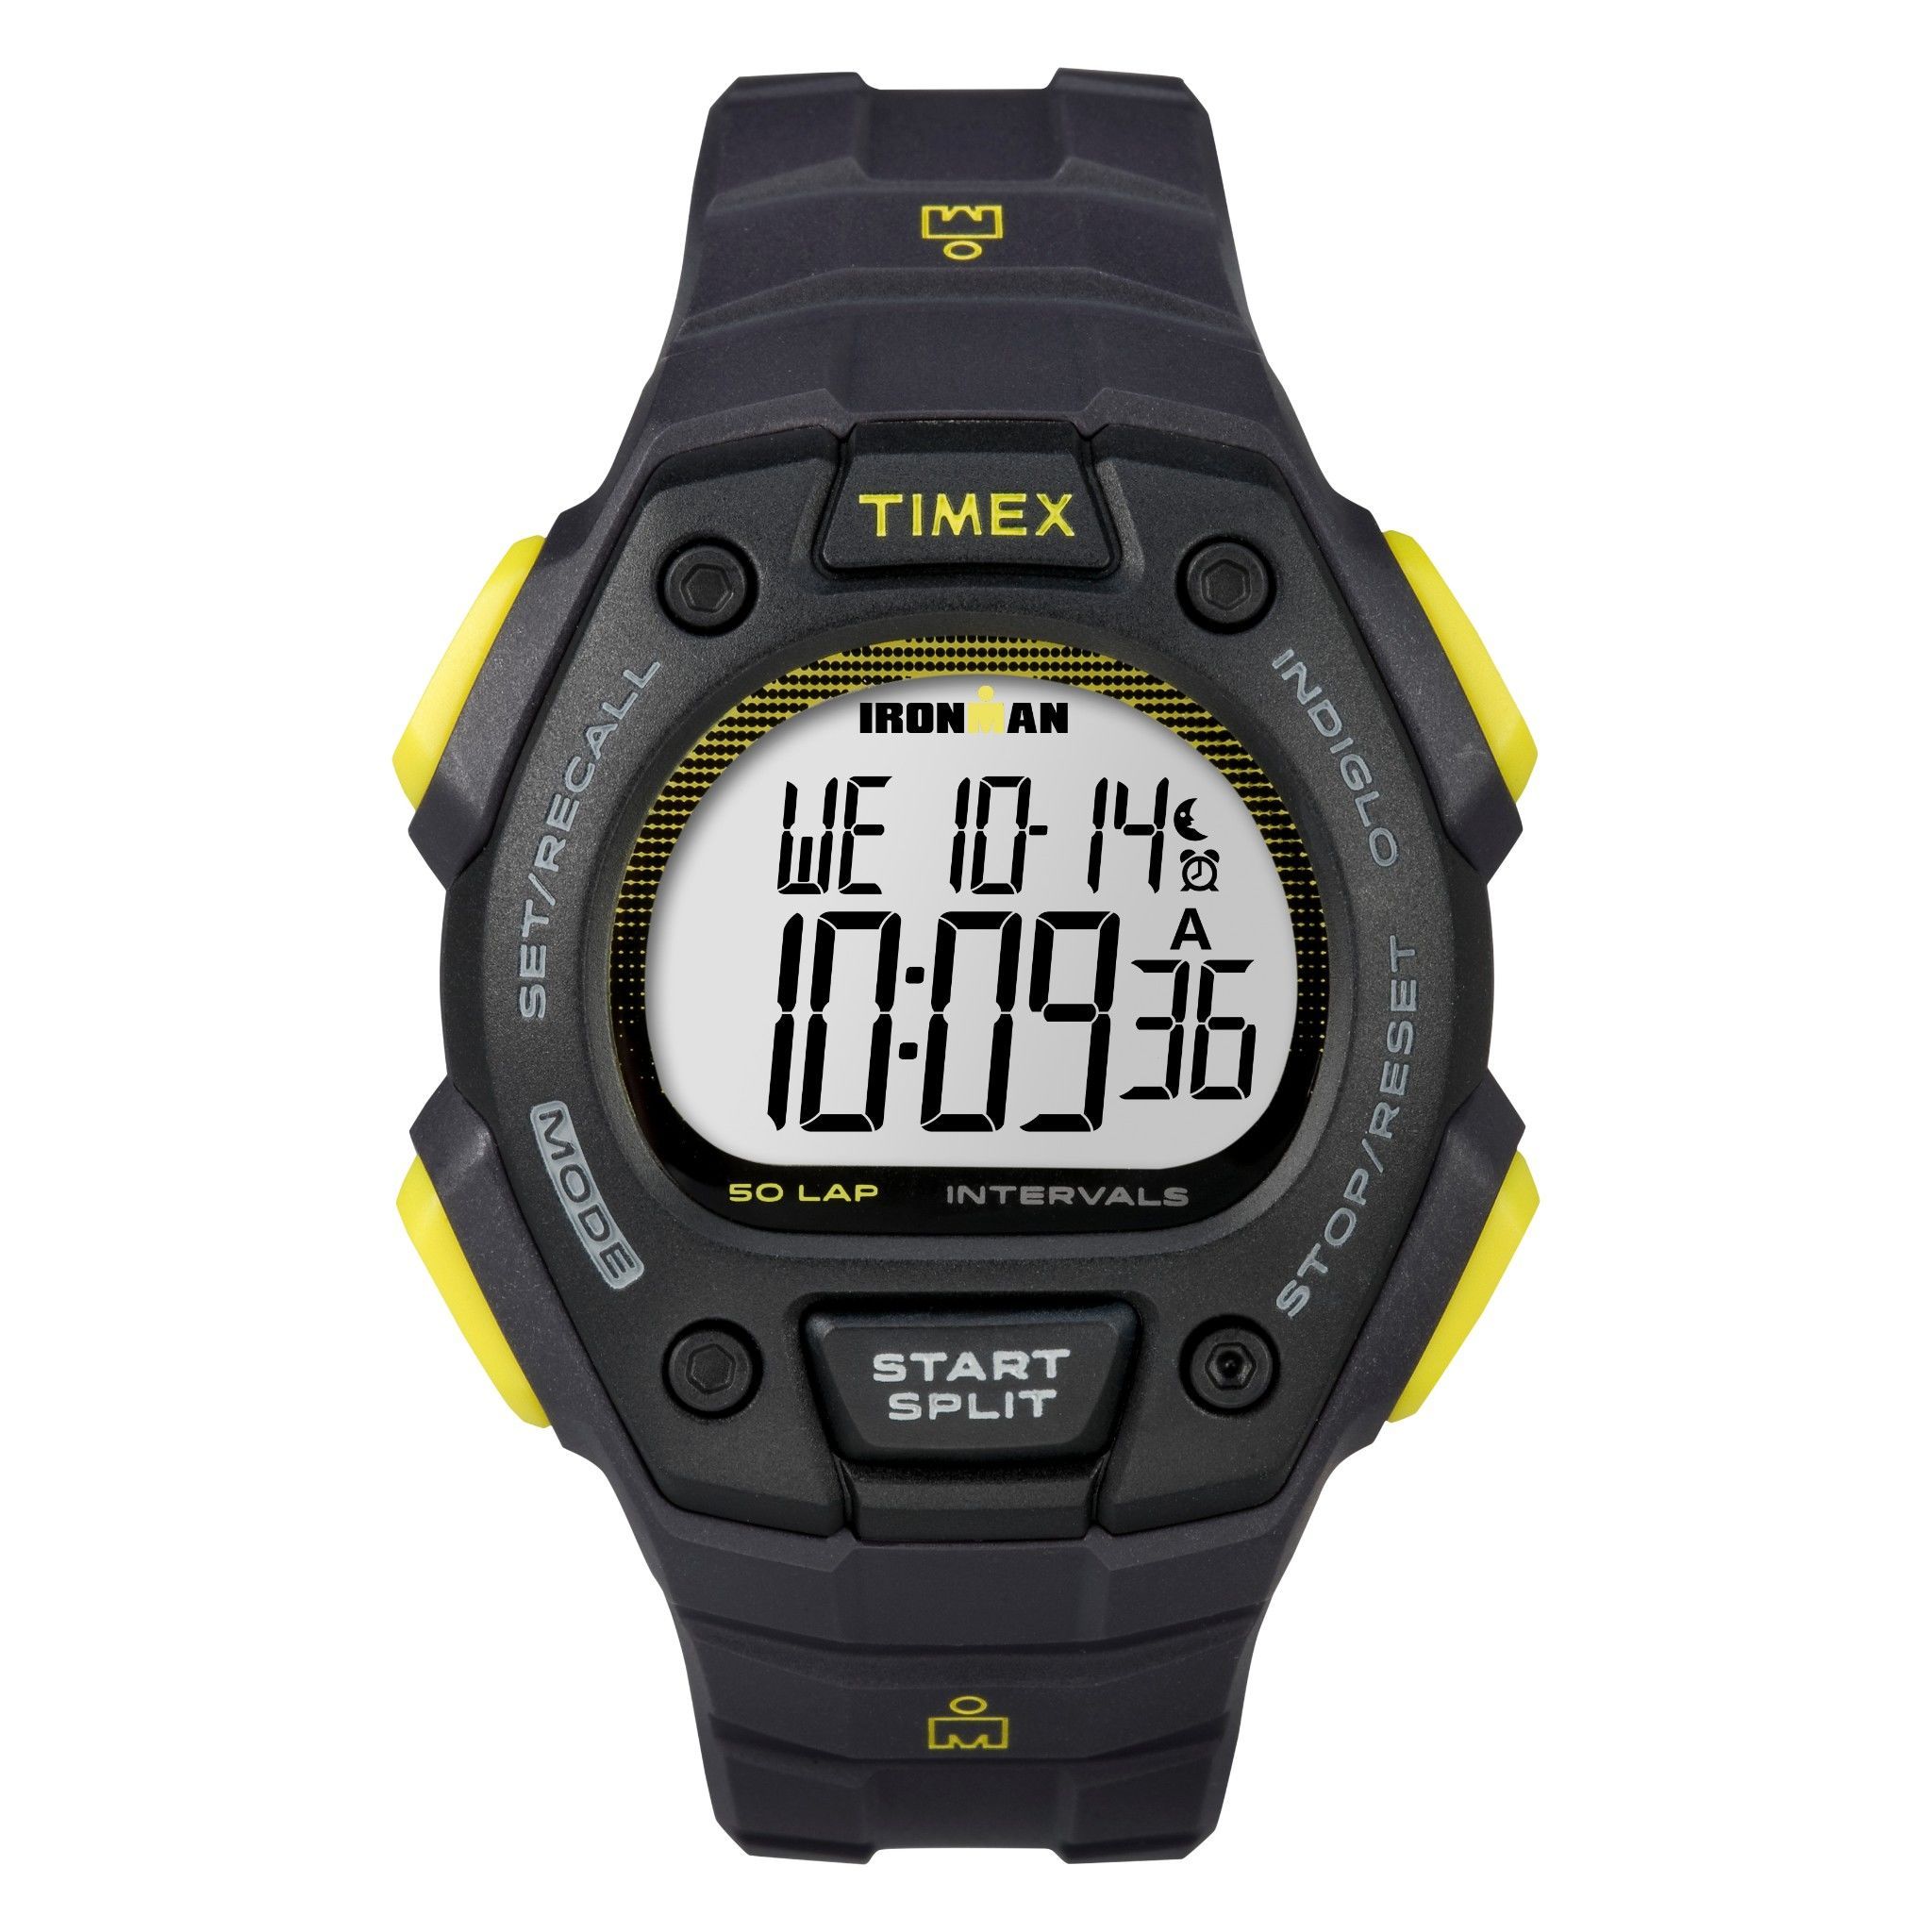  Timex - Đồng Hồ Thể Thao Nam Dây Cao Su TW5K86100 IRONMAN® Classic 50 Full-Size (Đen) 